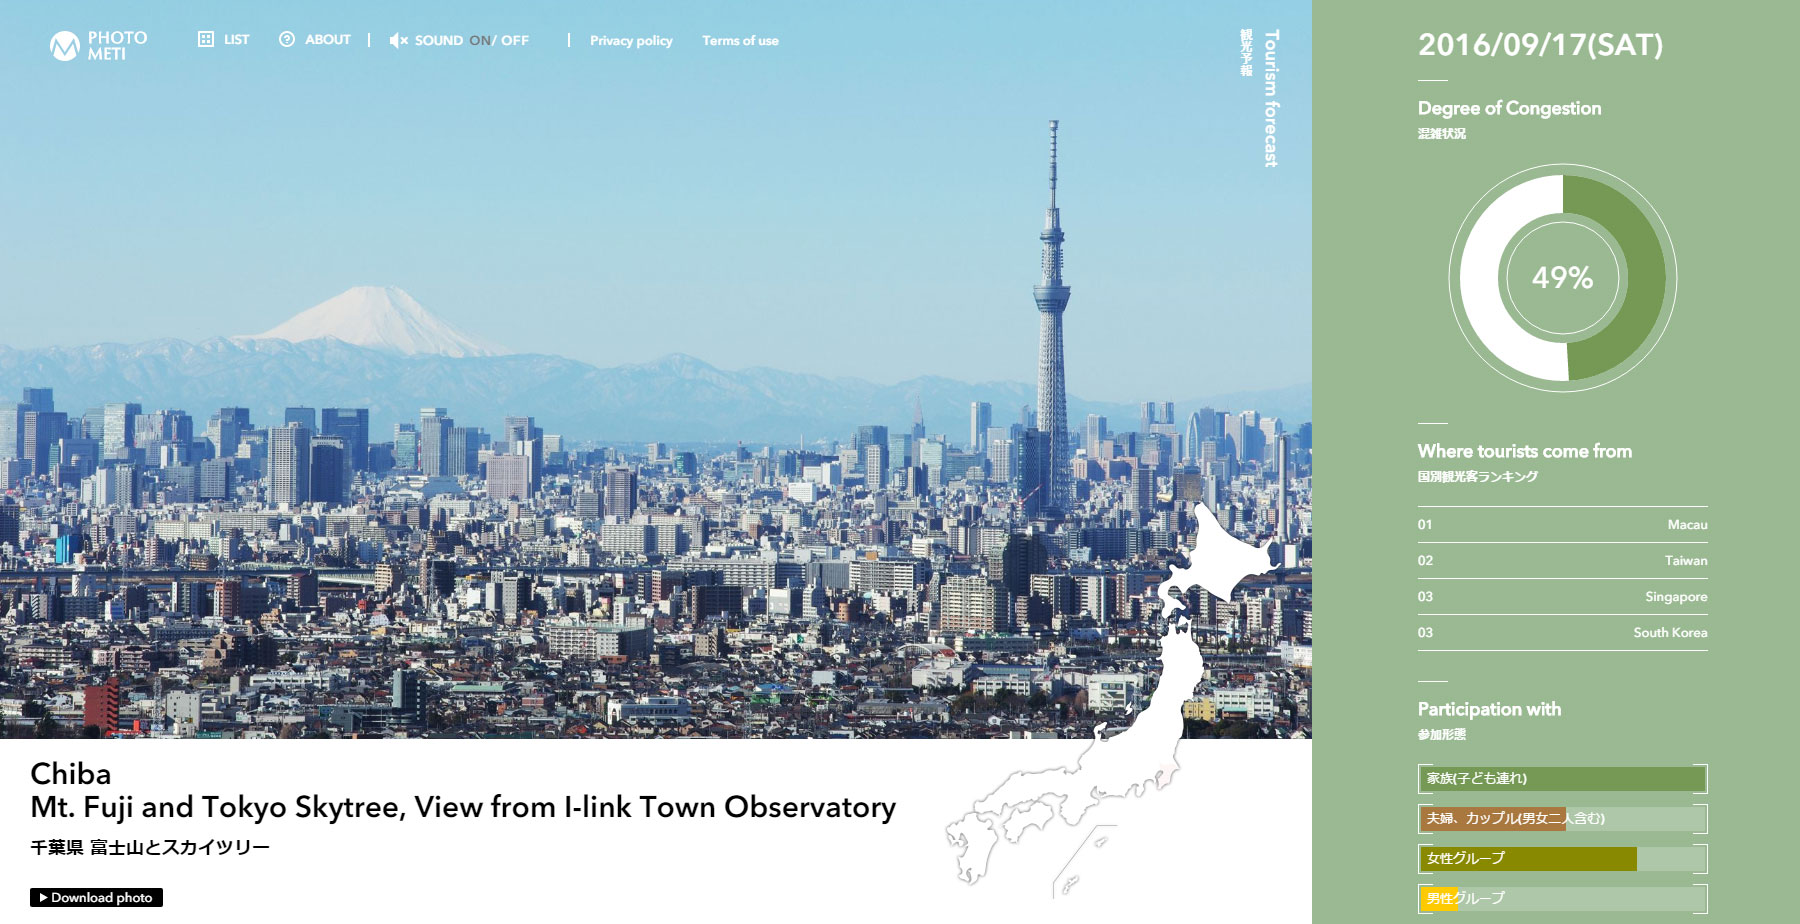 PHOTO METI PROJECT - Website of the Day